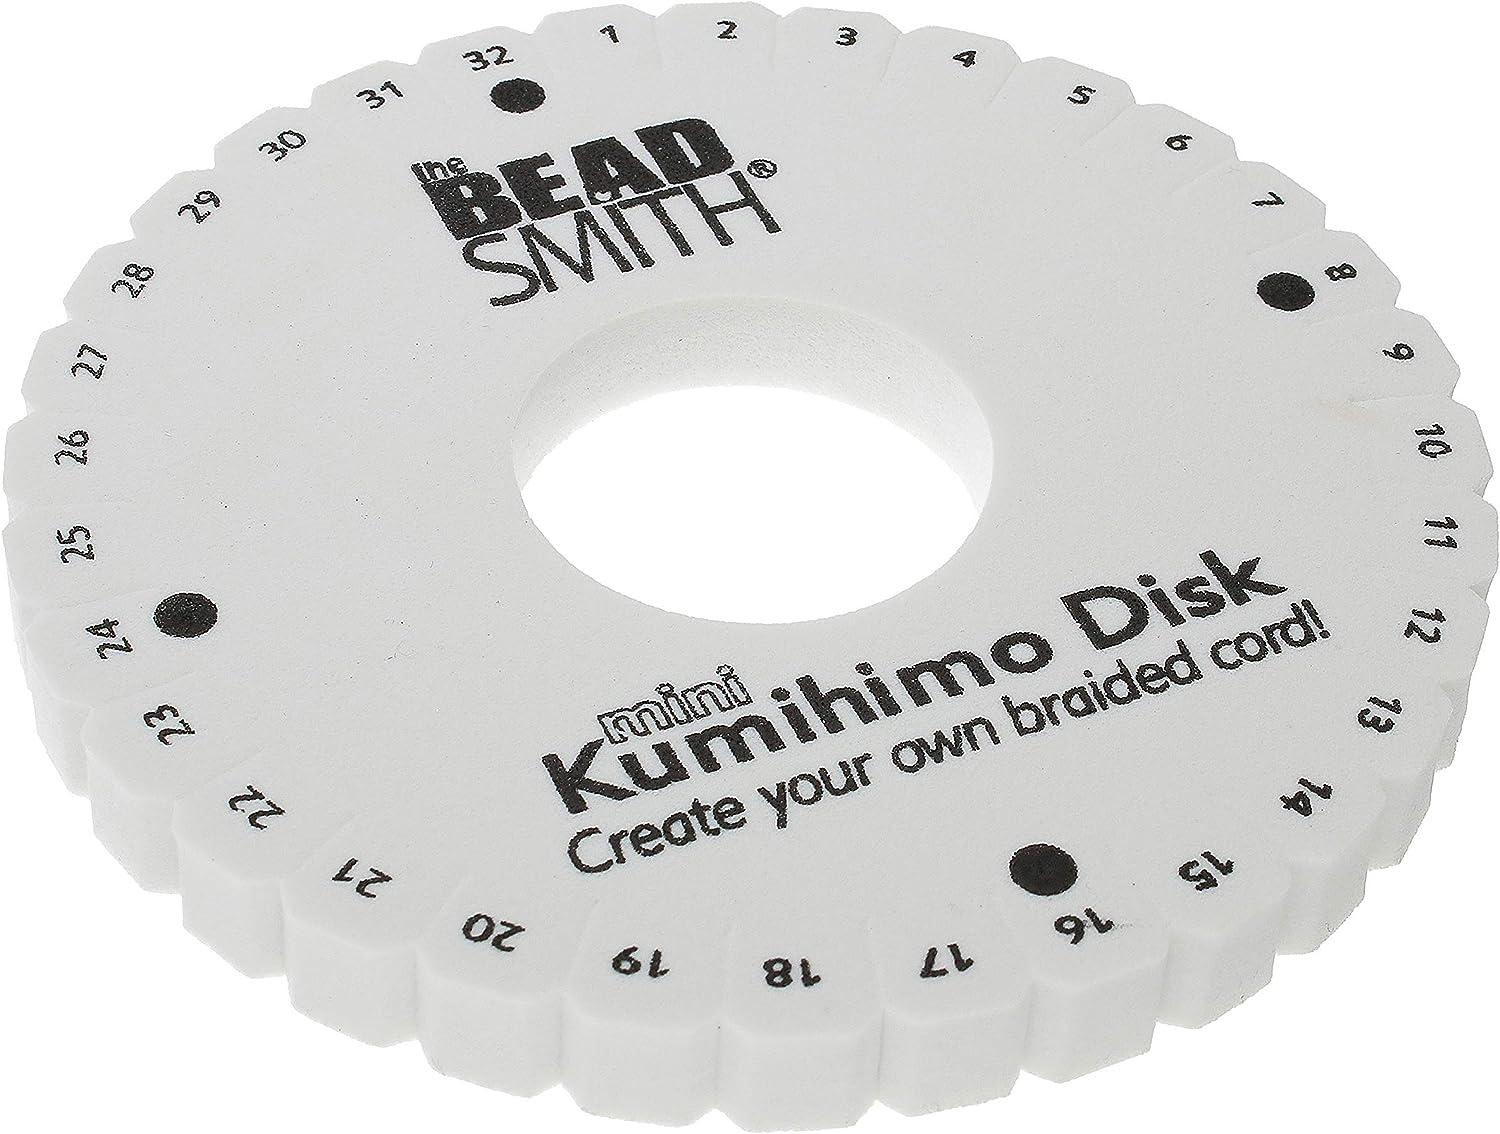 6 Kumihimo Disk Double Density W 32 Slots/35mm hole